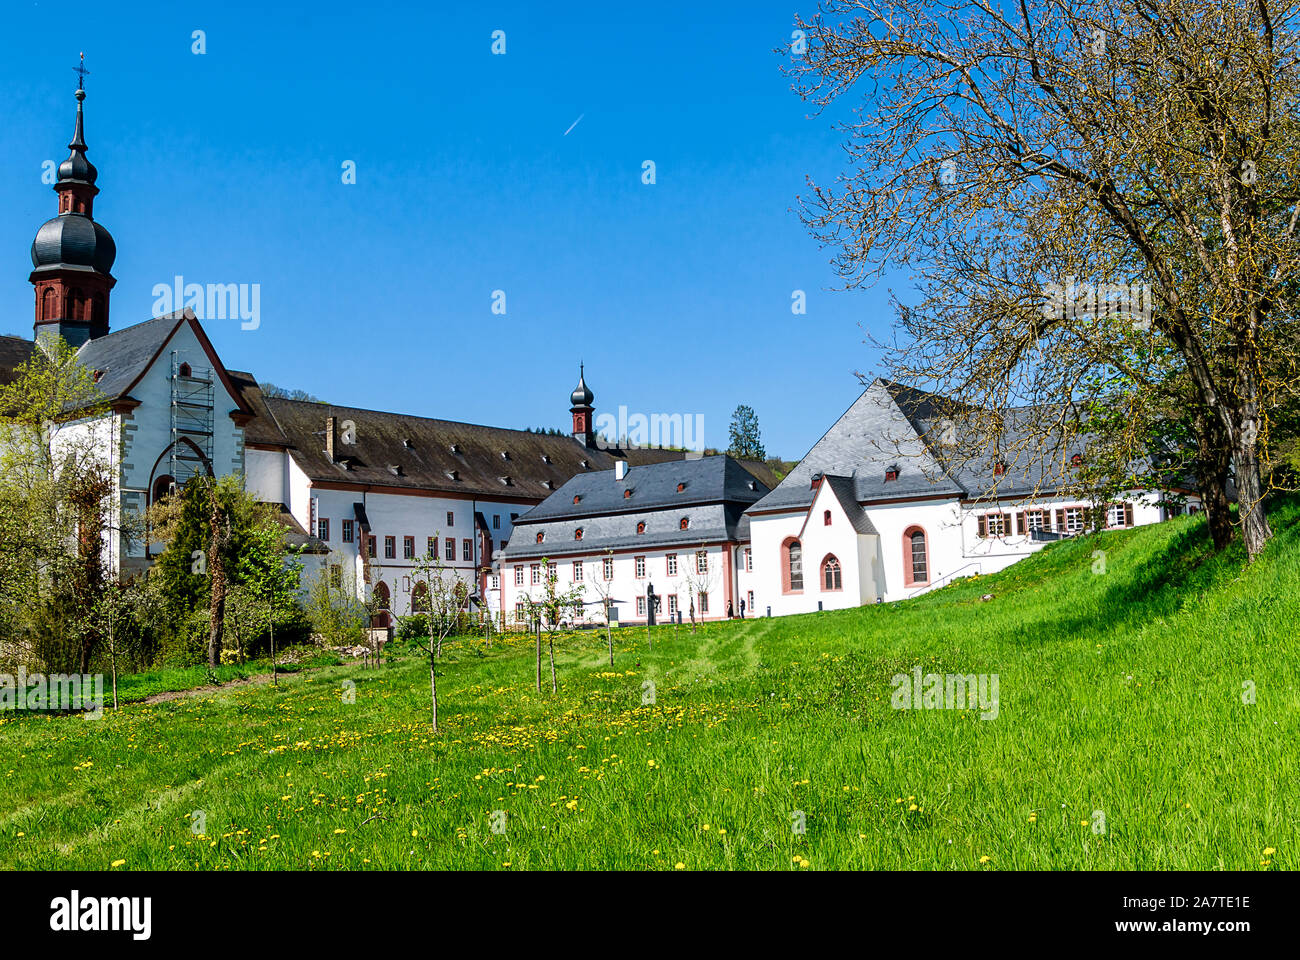 Eberbach Abbey, Mystic heritage of the Cistercian monks in Rheingau, filming location for the movie The Name of the Rose, Hesse, Germany Stock Photo